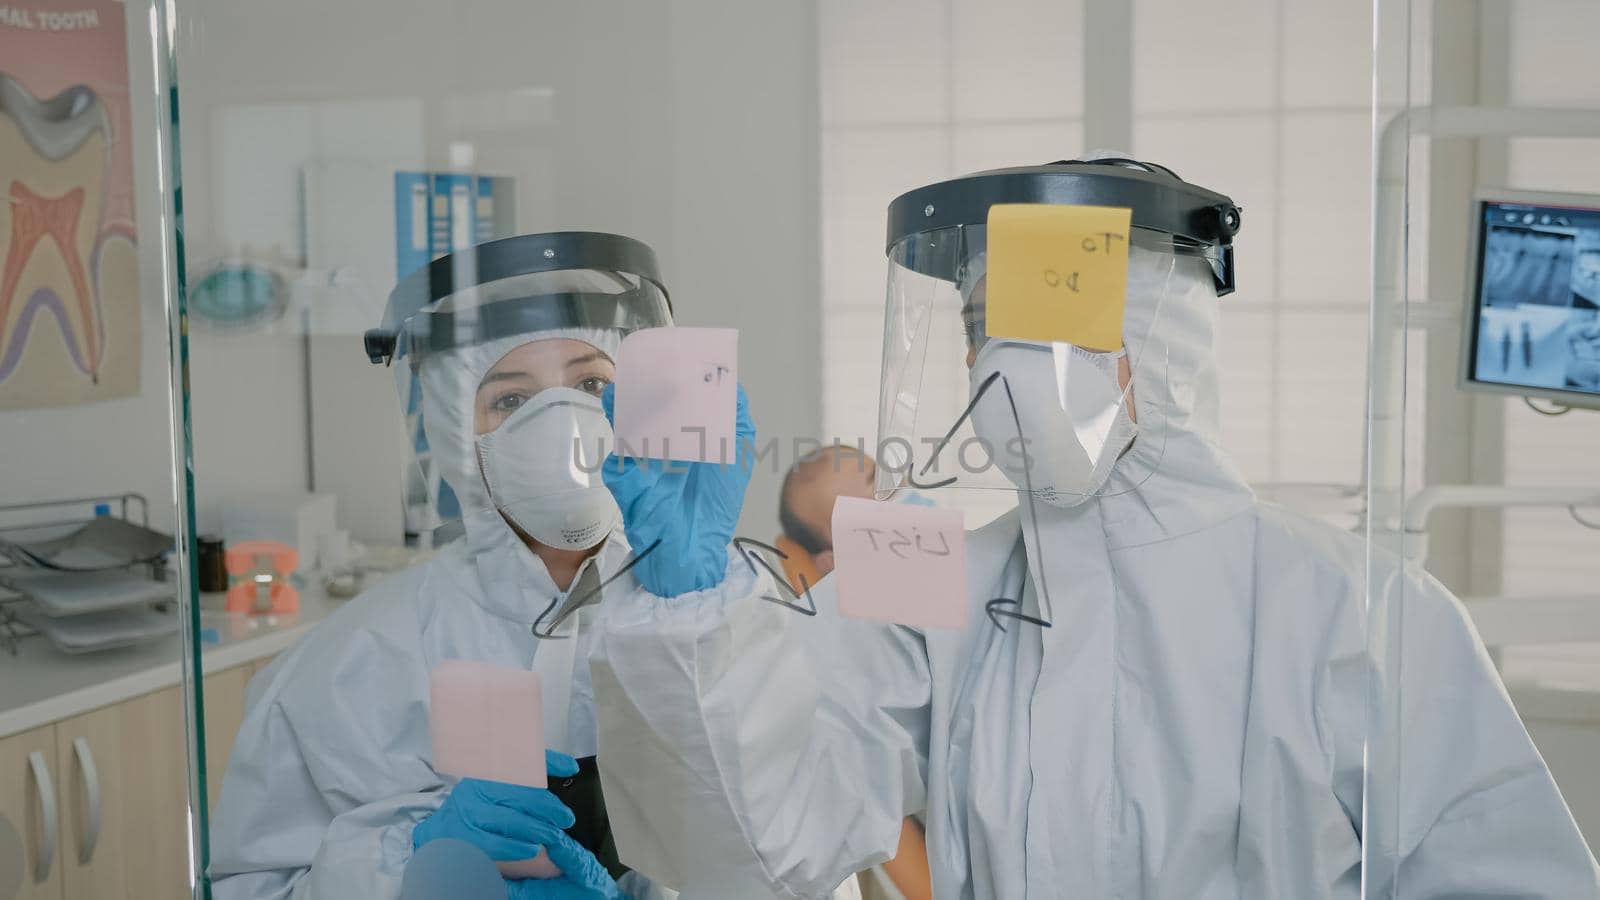 Orthodontists in ppe suits making diagram with sticky notes on glass at dentistry office. Dentist and dental assistant using tools for oral care operation on patient sitting in cabinet